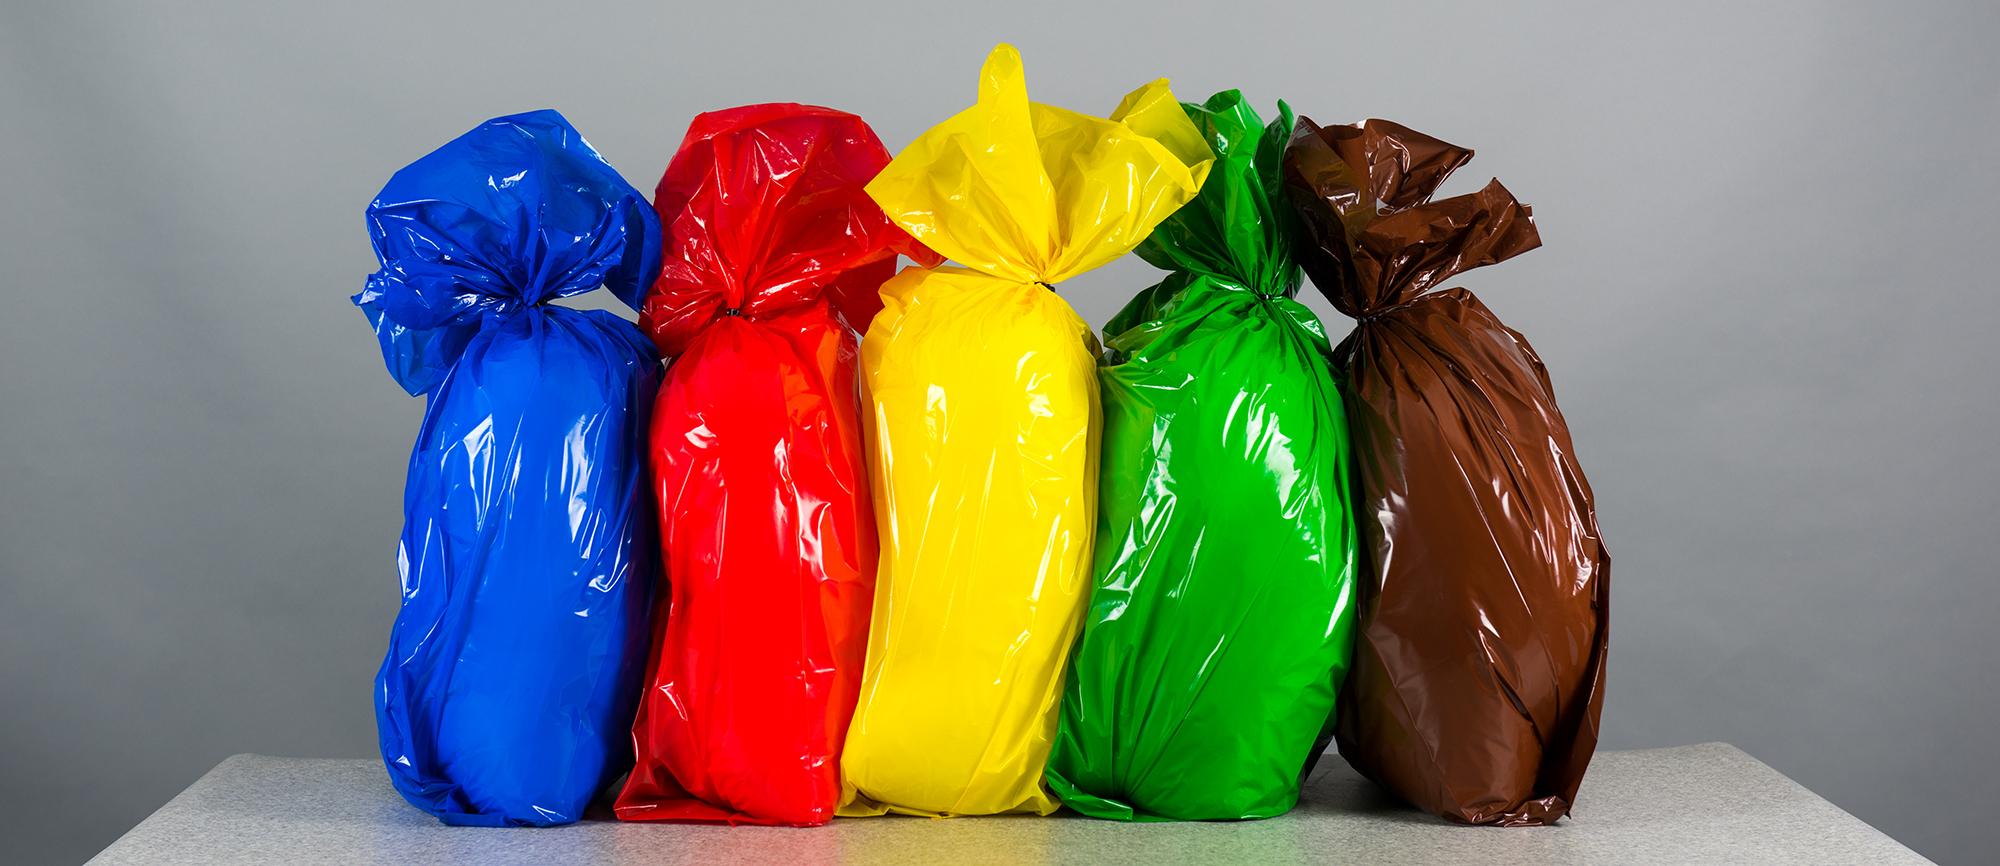 Recycled waste bags